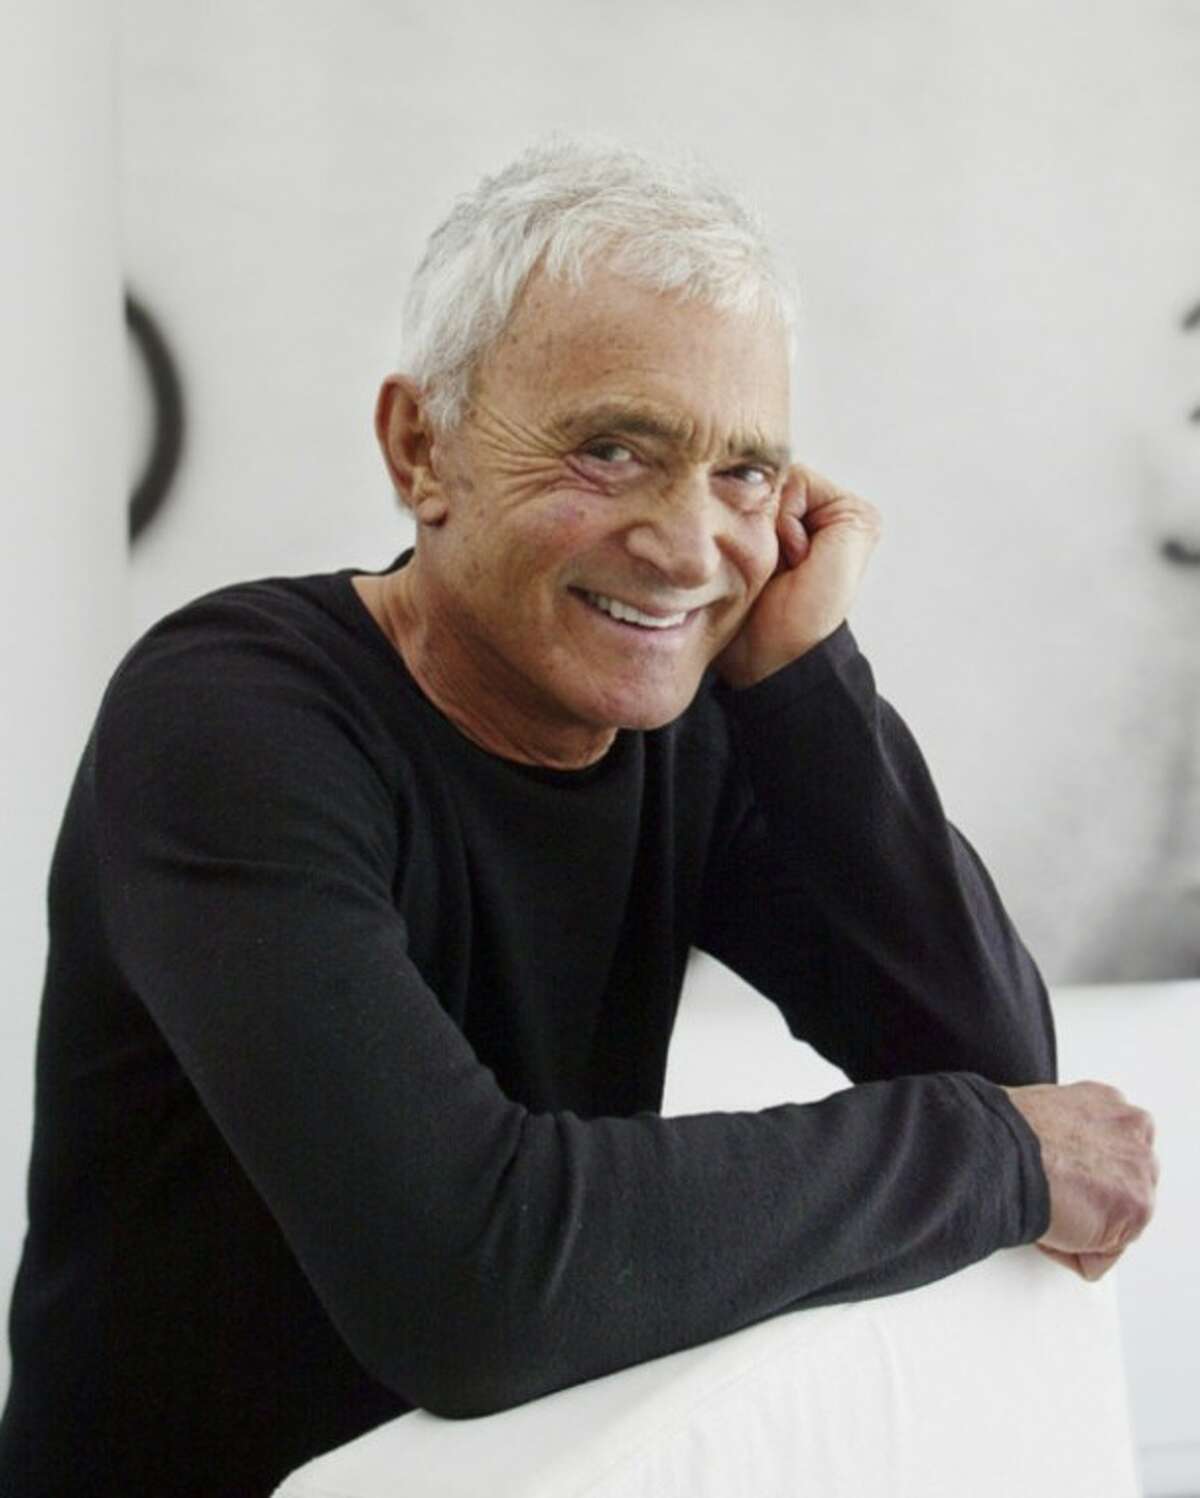 FILE - In this April 23, 2003 file photo, Vidal Sassoon poses in his Beverly Hills, Calif., home. Sassoon, whose 1960s wash-and-wear cuts freed women from endless teasing and hairspray died Wednesday, May 9, 2012, at his home. He was 84. (AP Photo/Damian Dovarganes, file)